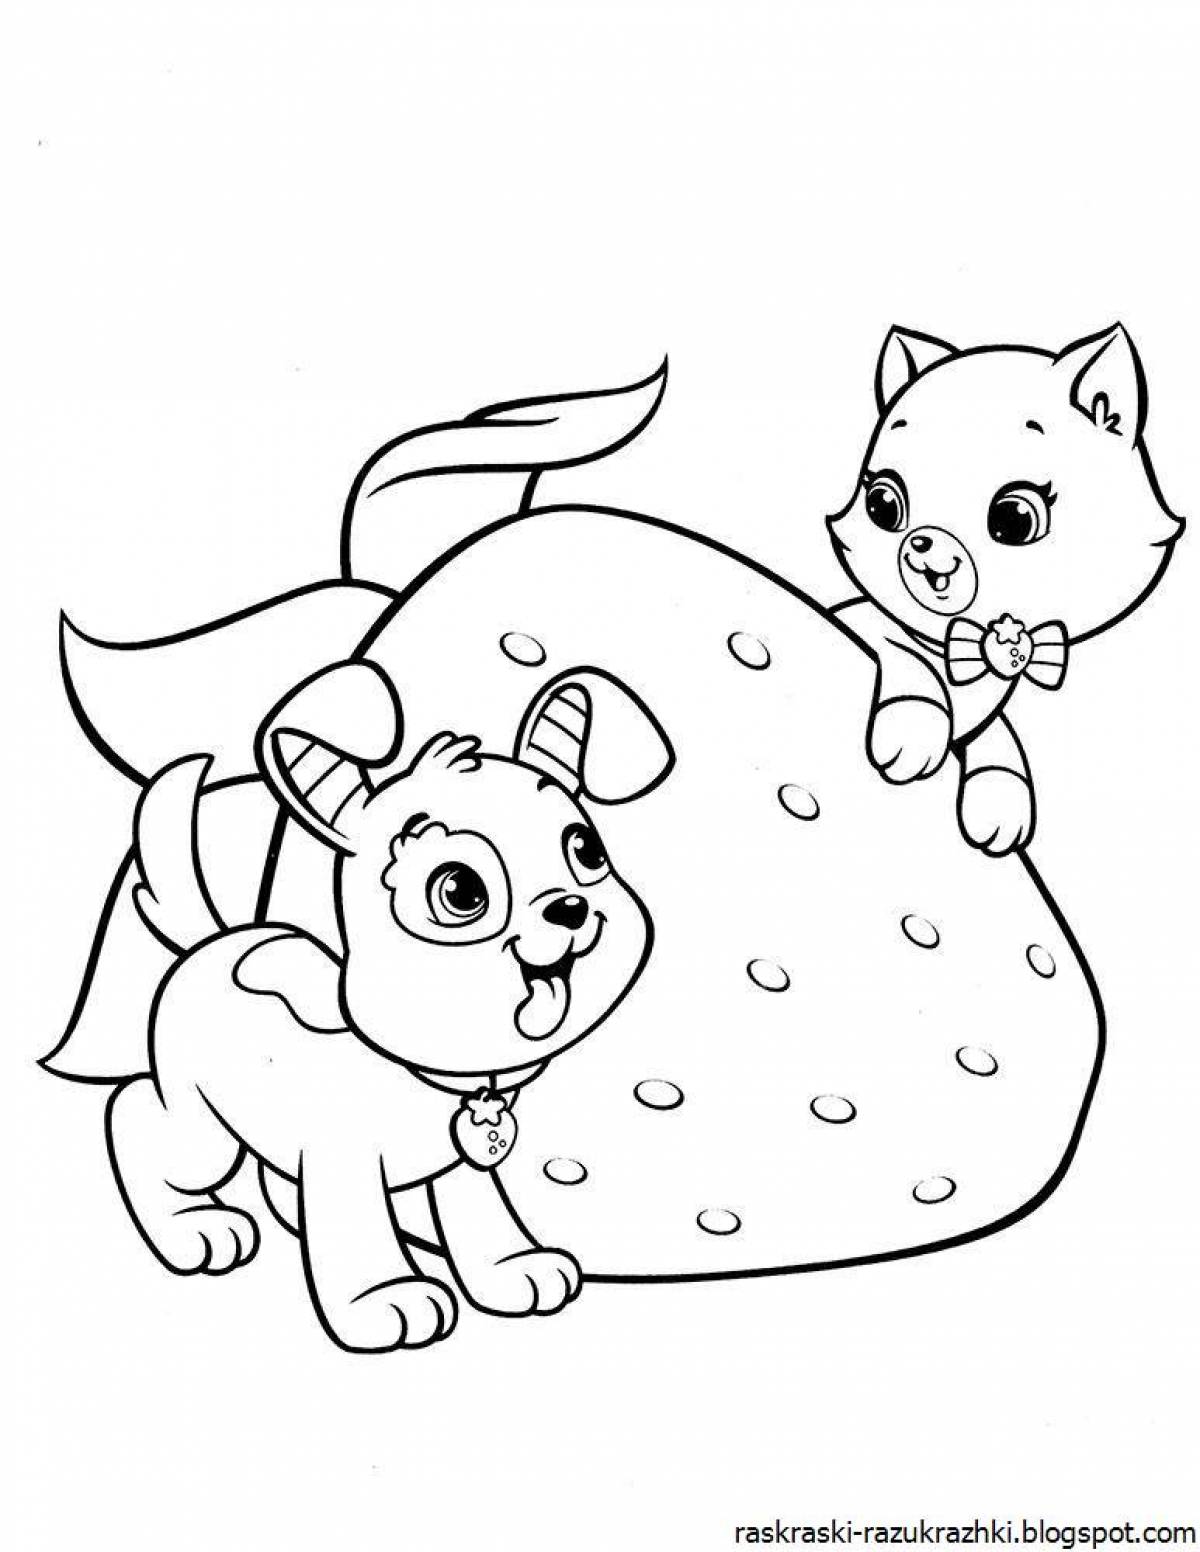 Adorable coloring pages dogs kittens for kids